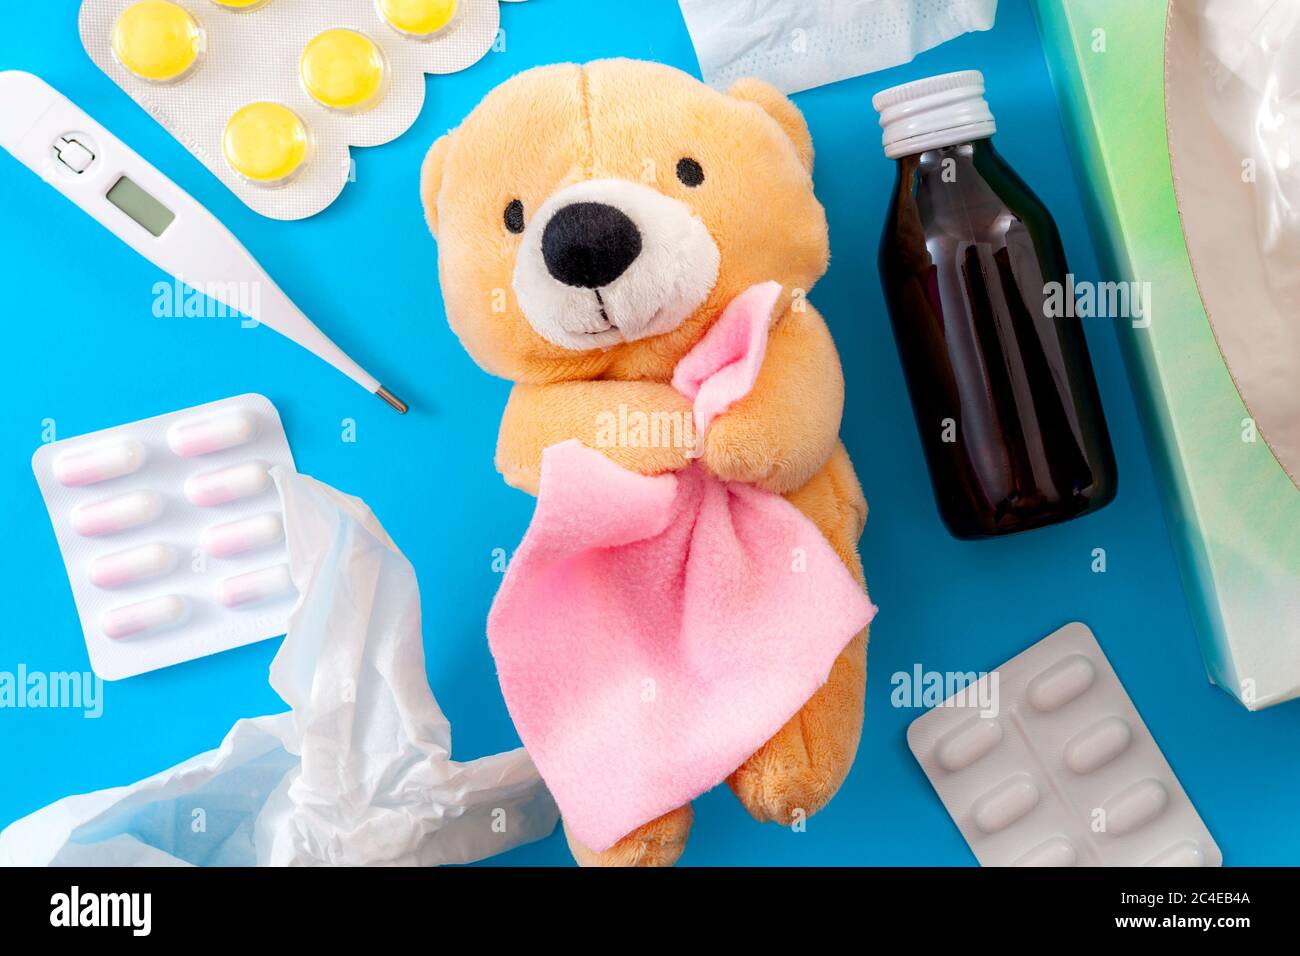 Cold and flu treatment and pediatrics medicine concept with a teddy bear holding a blanket surrounded by  a thermometer, bottle of cough syrup, sore t Stock Photo